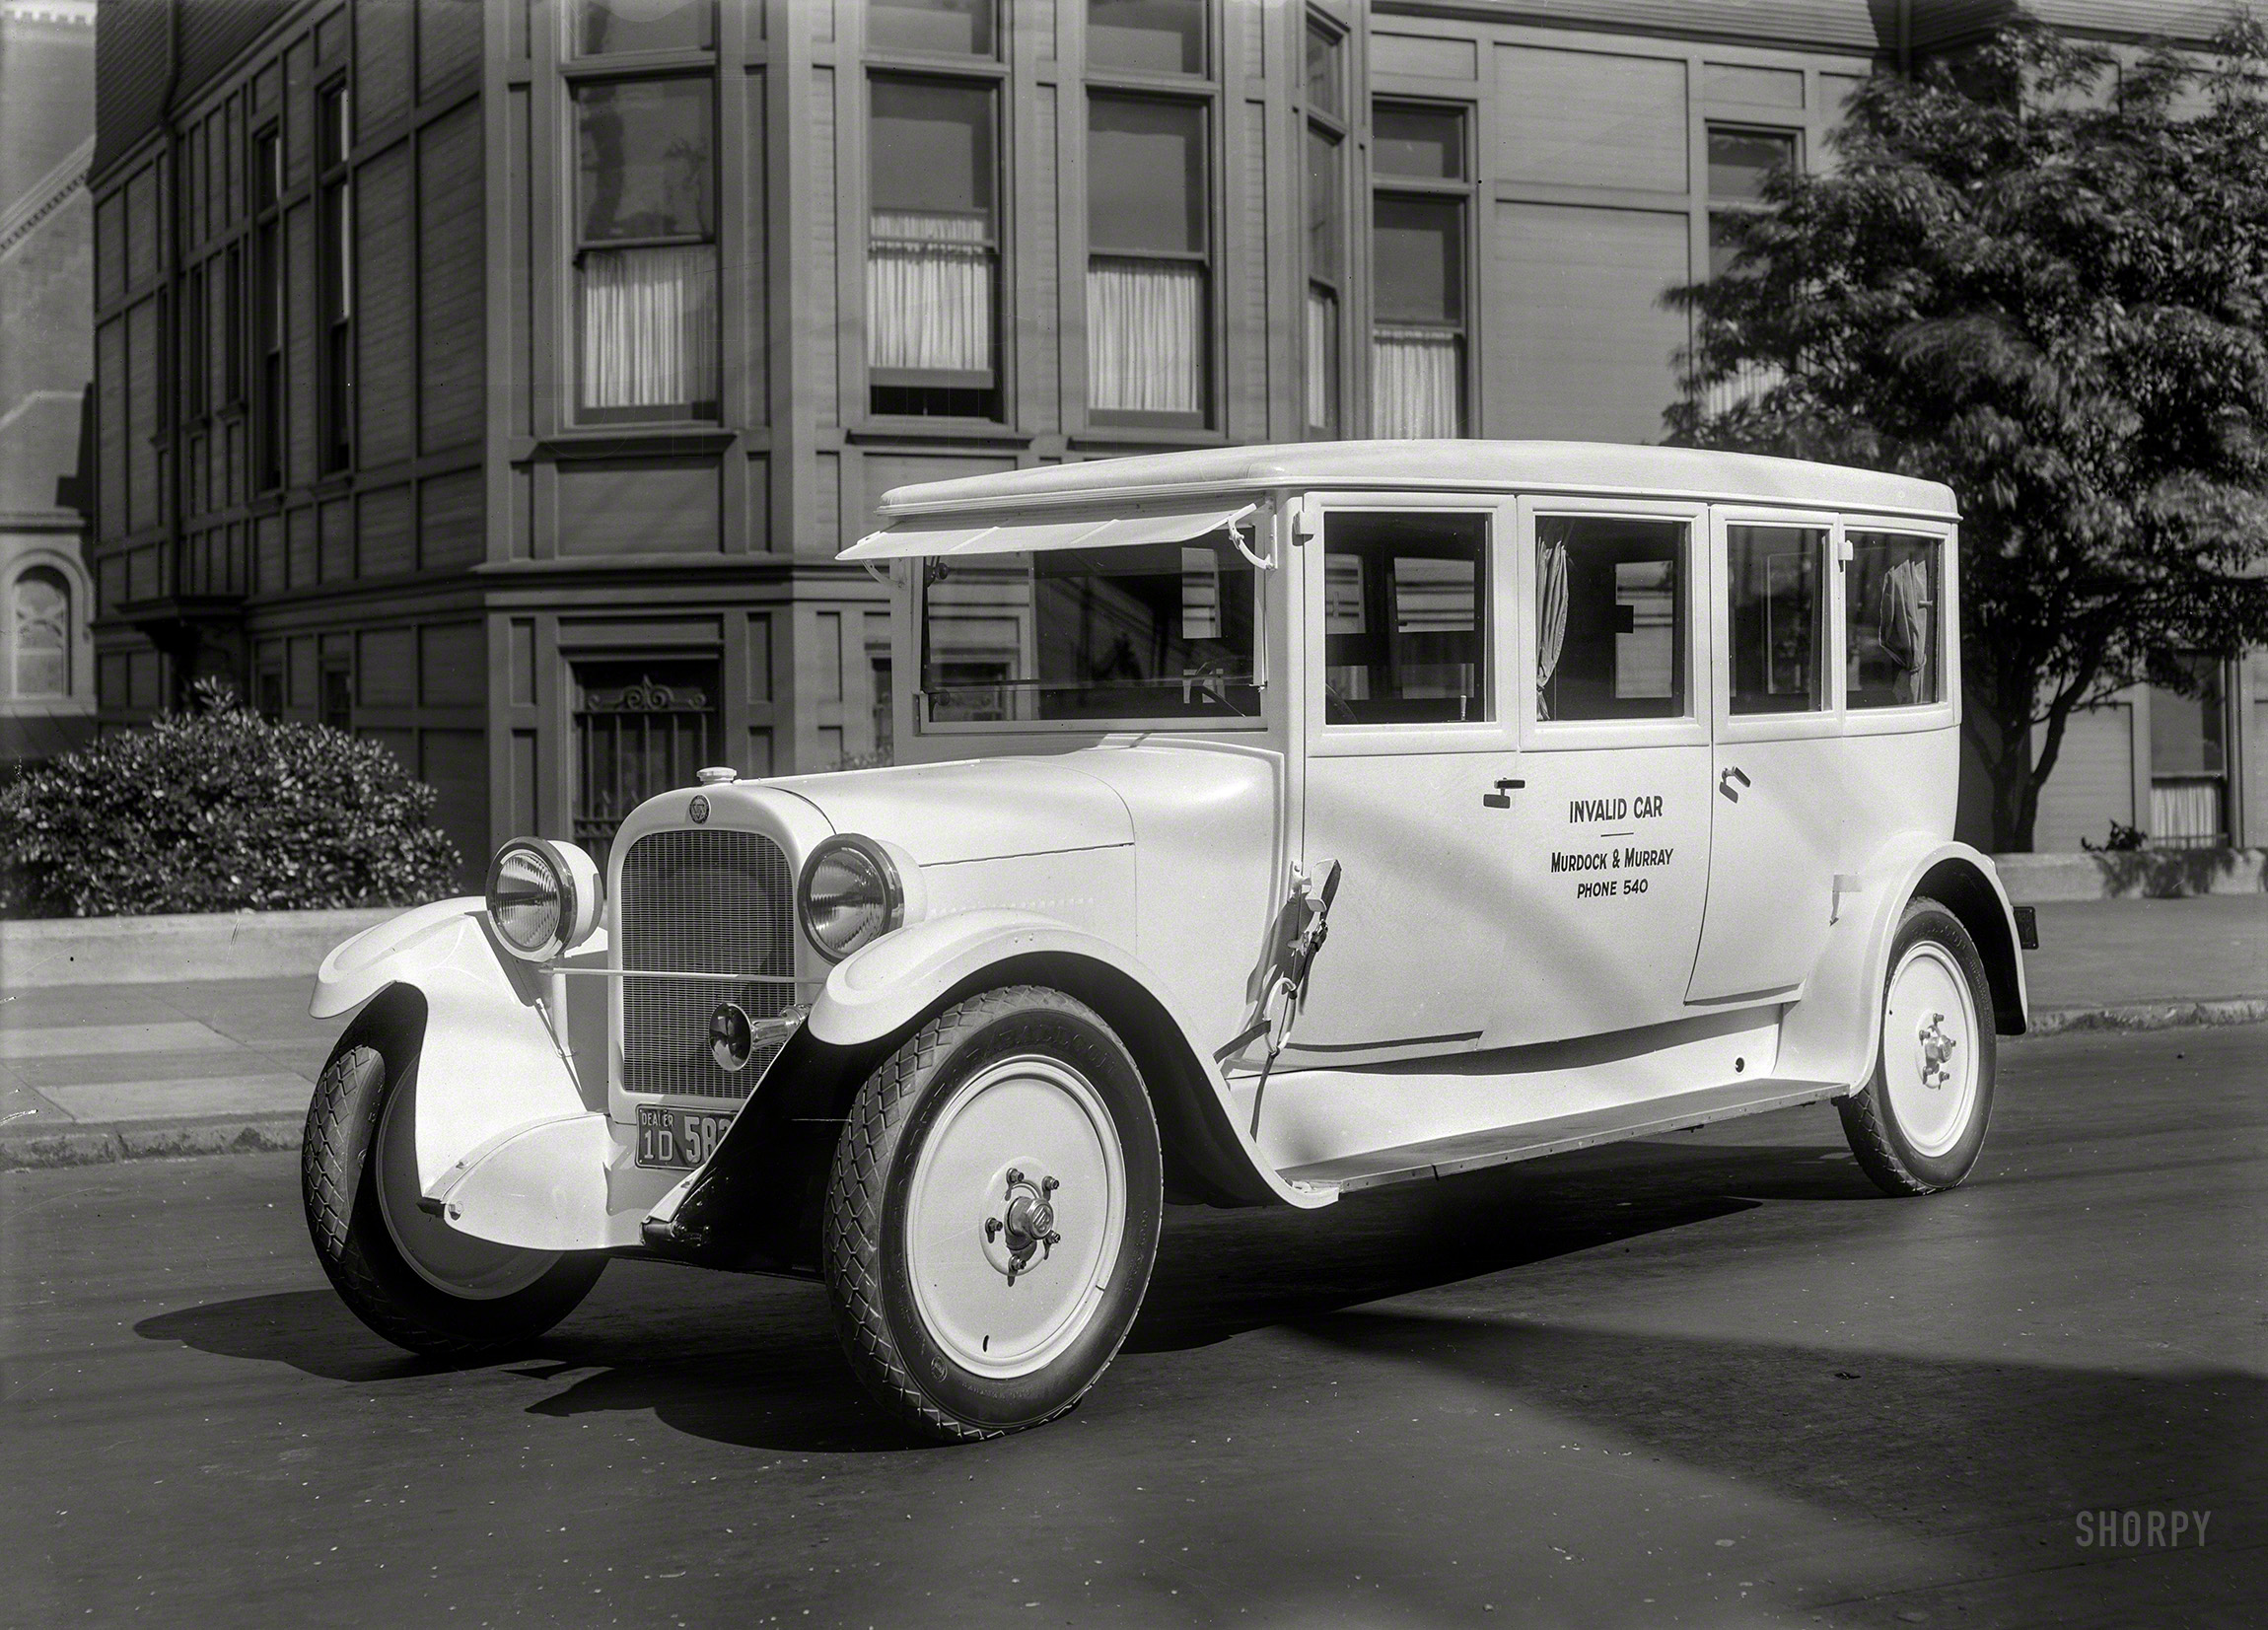 San Francisco circa 1926. "Dodge ambulance." Today's chapter in the Shorpy Chronicle of Convalescent Conveyances. Photo by Chris Helin. View full size.